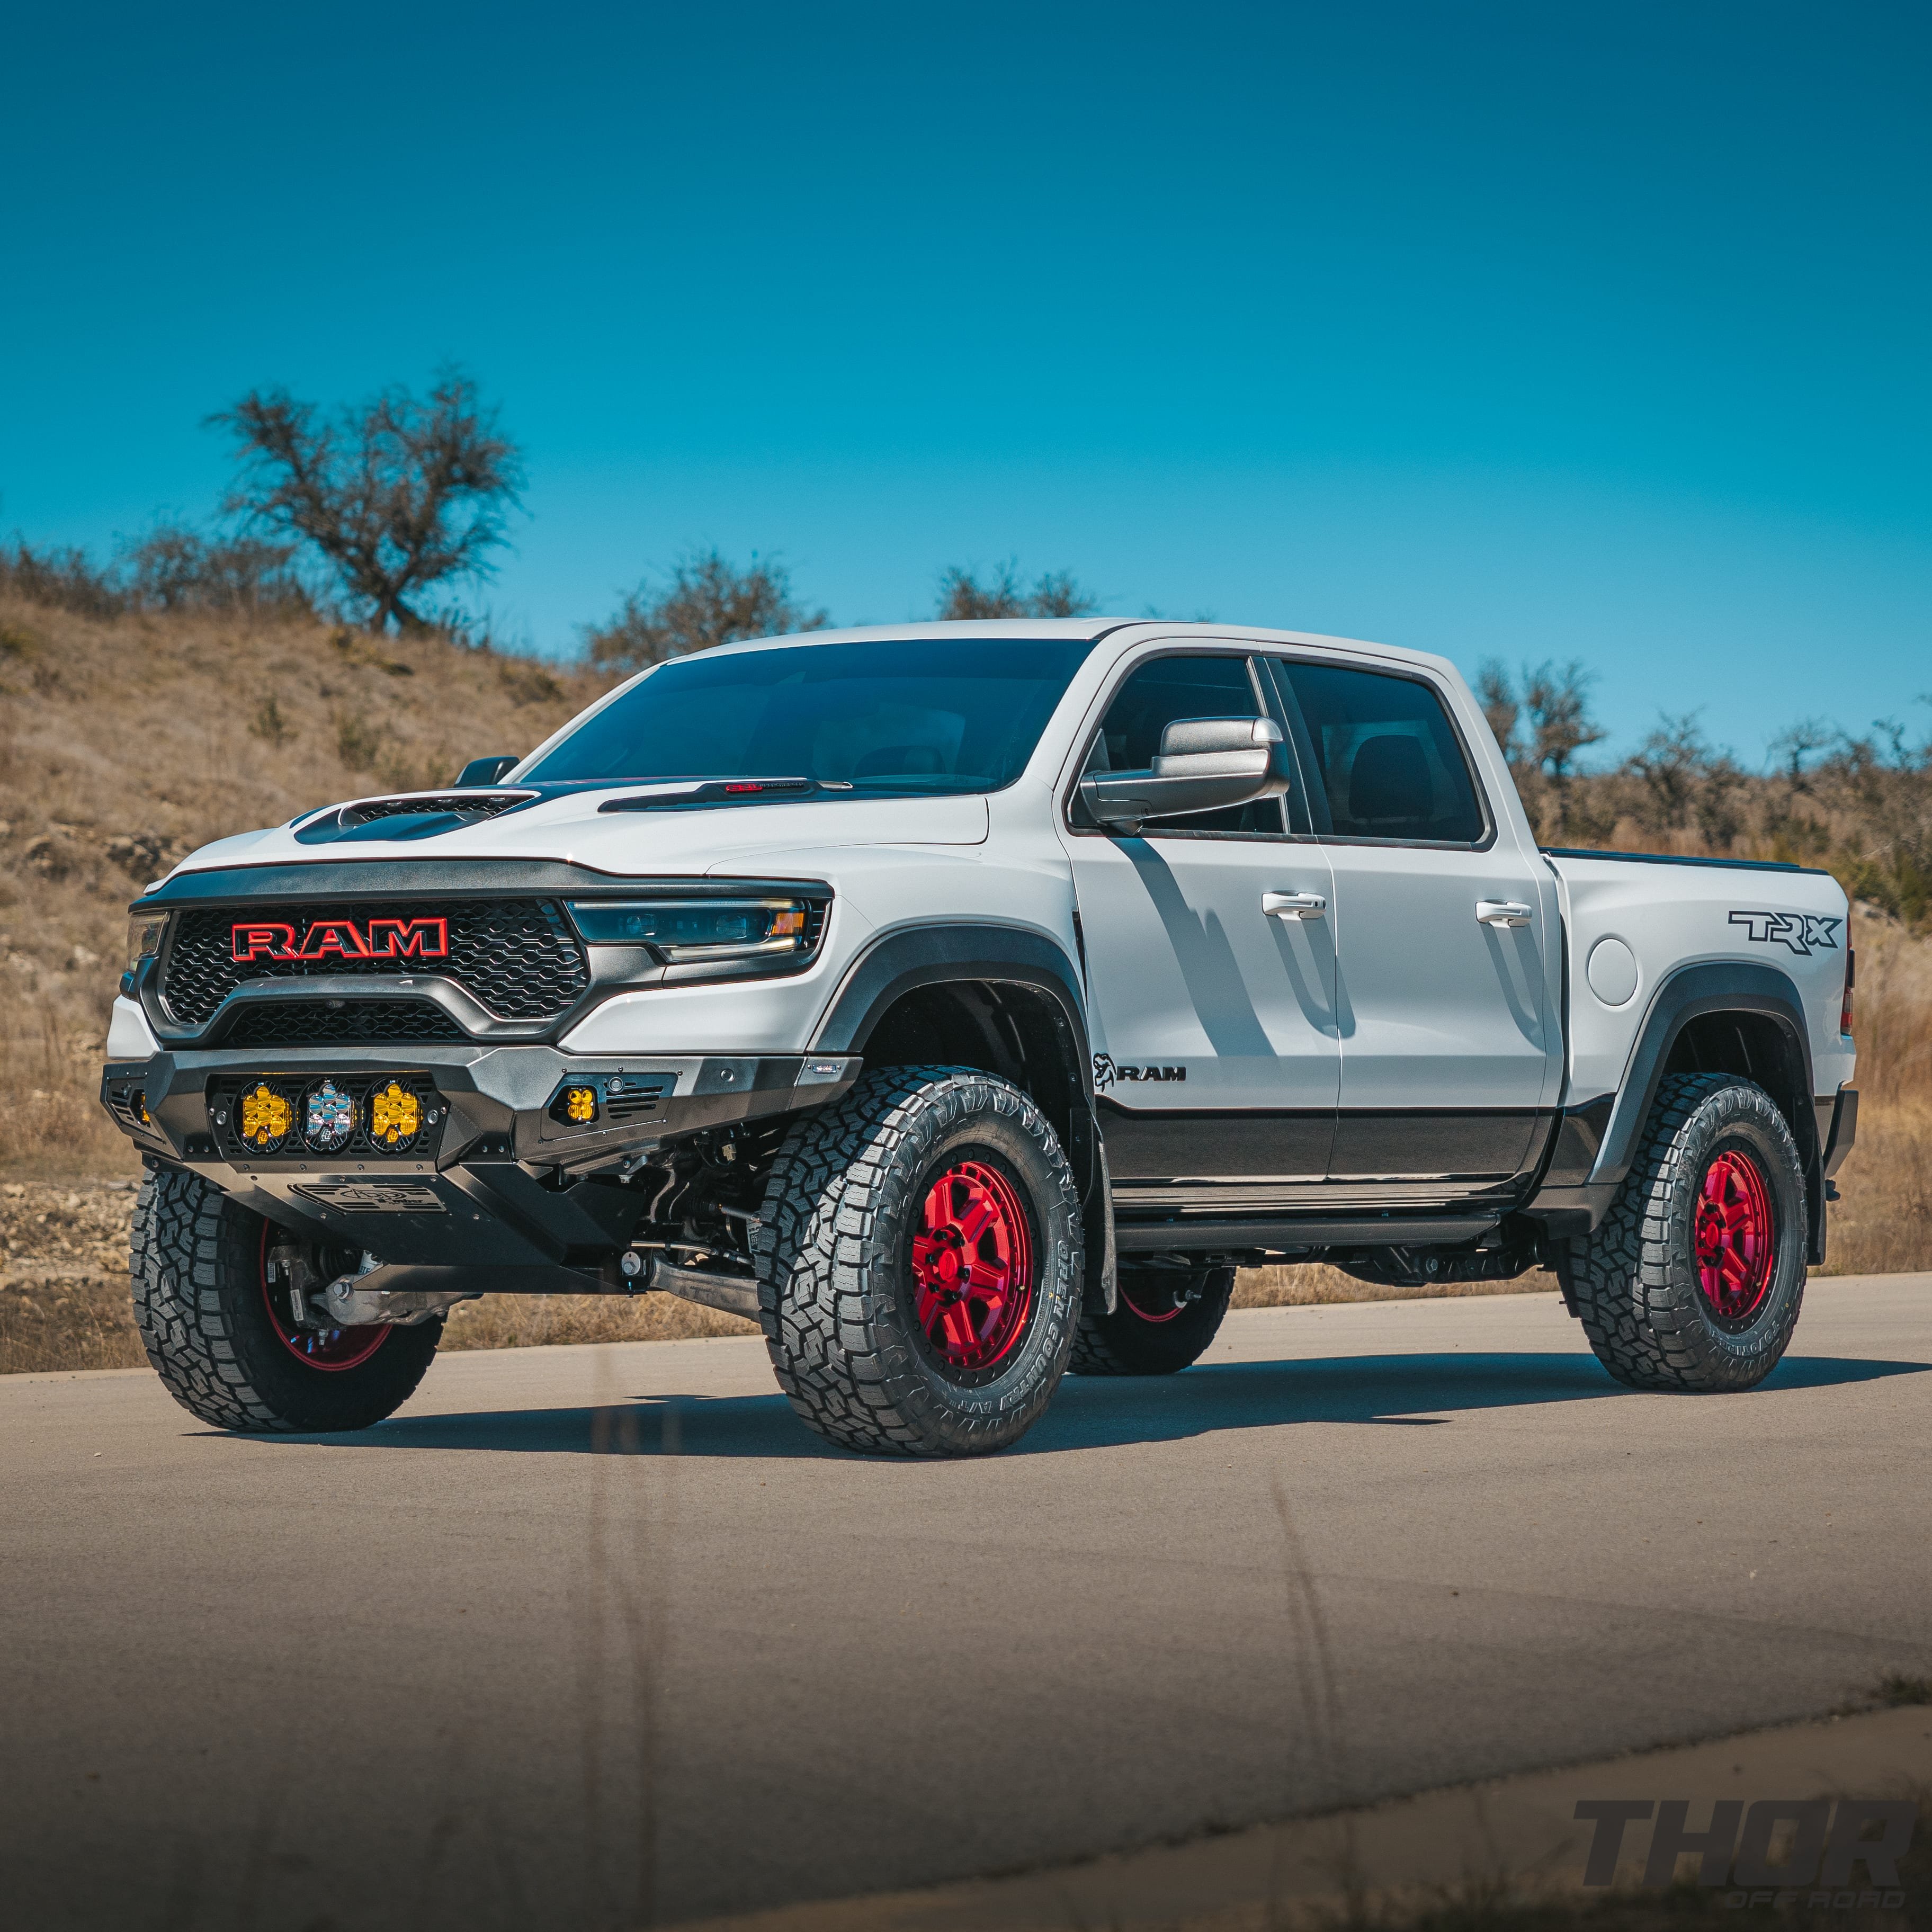 2022 RAM 1500 TRX in White with AFE Leveling Kit, 20x9" Black Rhino Reno Candy Red Wheels, 35x12.50R20 Toyo AT III, ADD Front and Rear Bumpers, Baja Design LP6 Center Lights, Baja Design Squadron Front and Rear Lights, Retrax Pro MX Bed Cover, Baja Design Rock Lighting